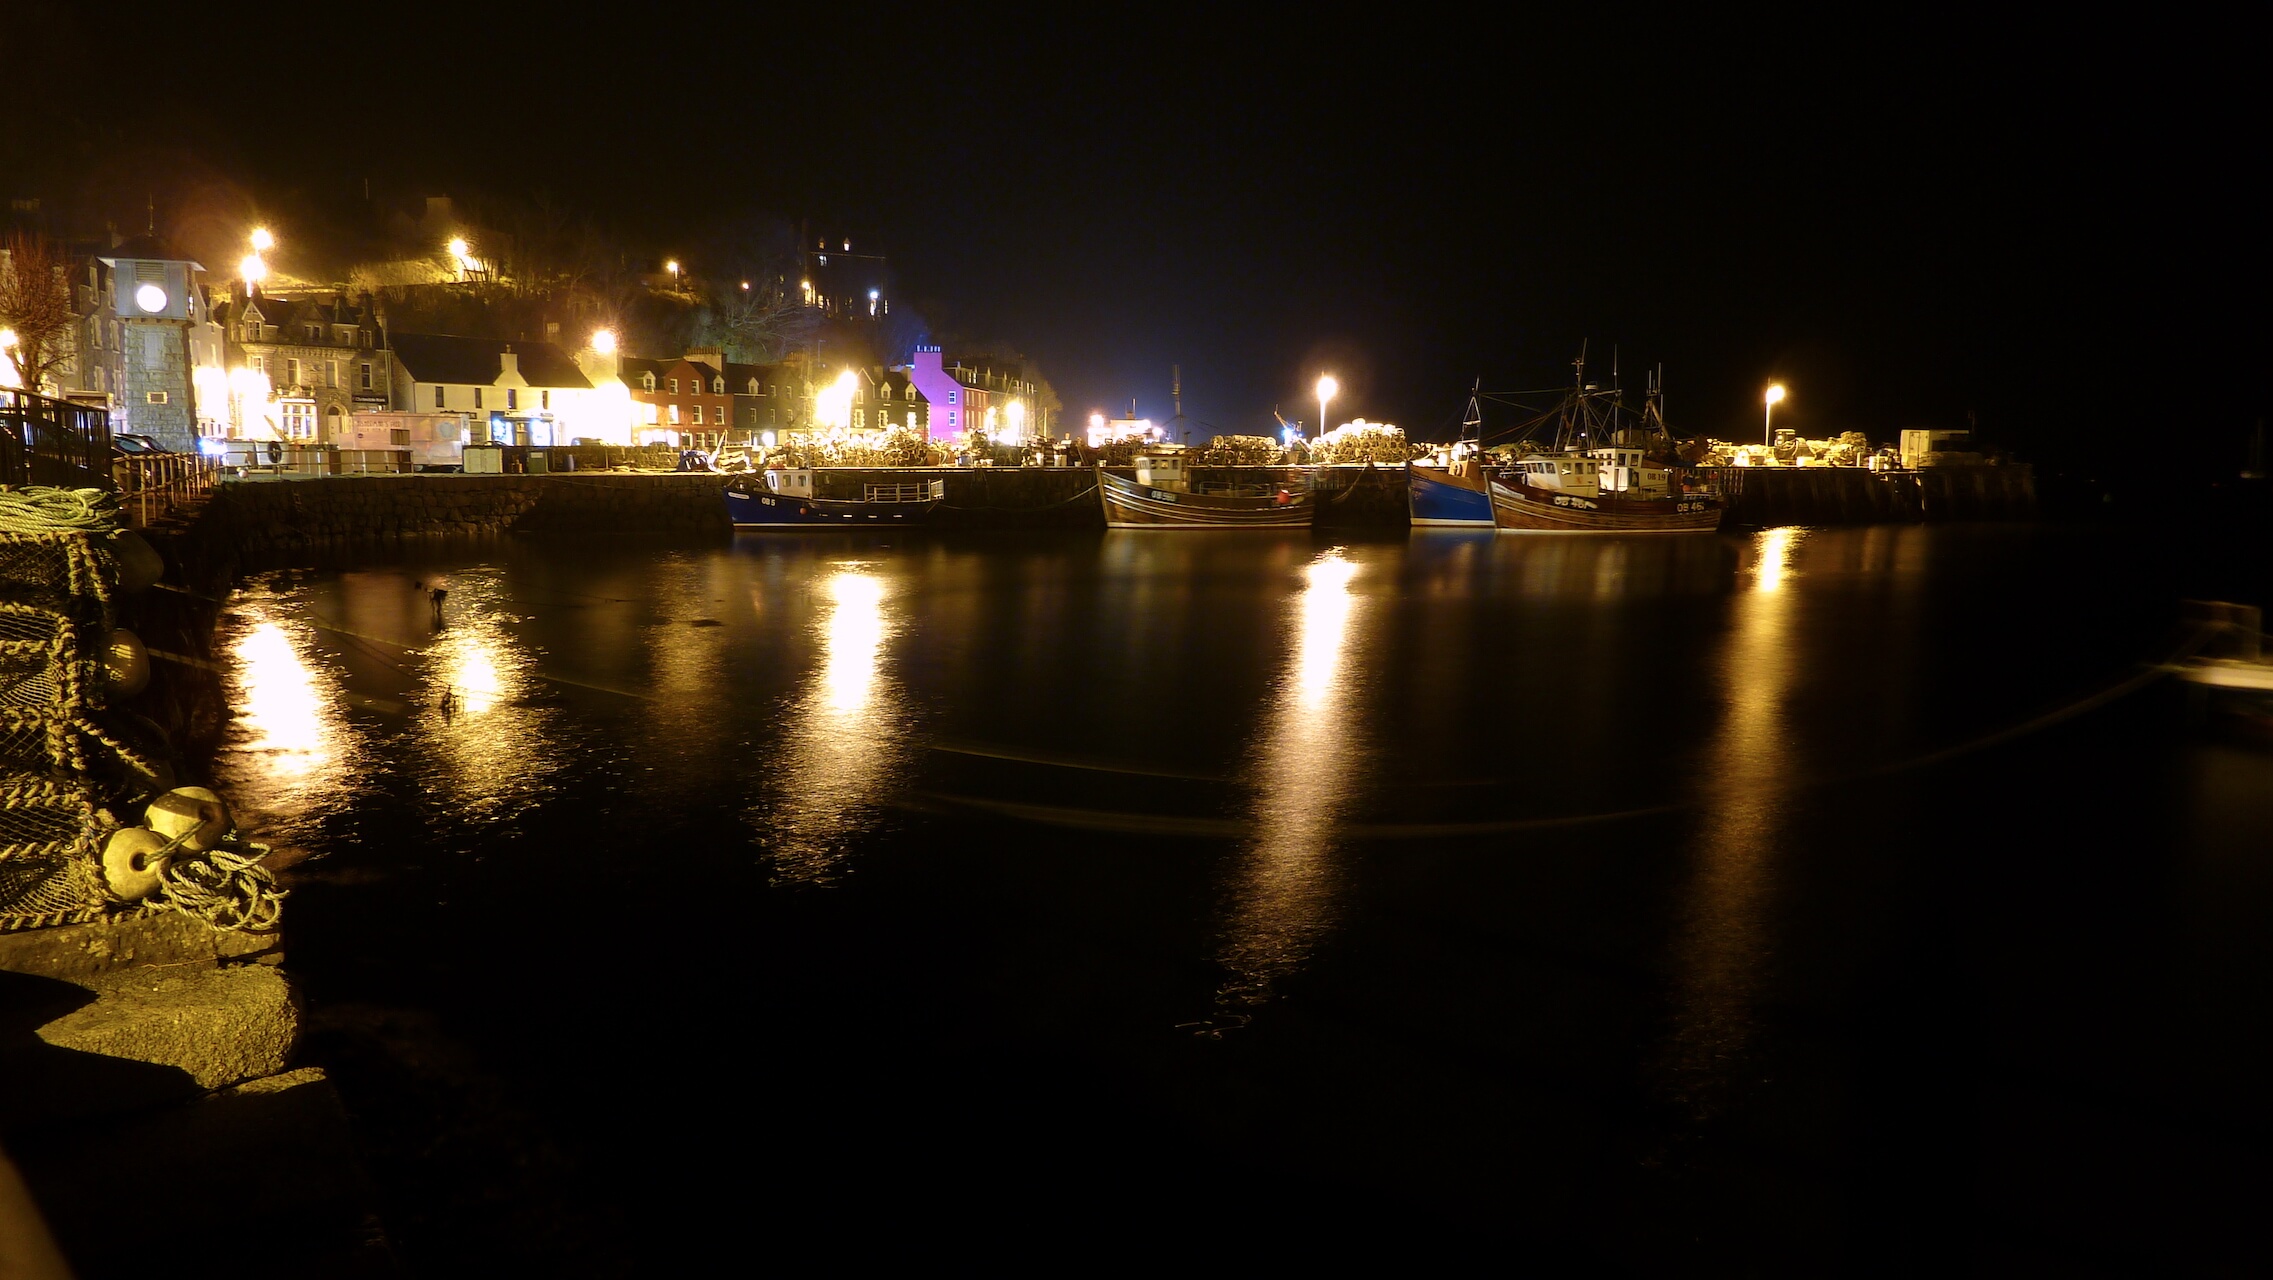 Tobermory Harbour lit up at night.